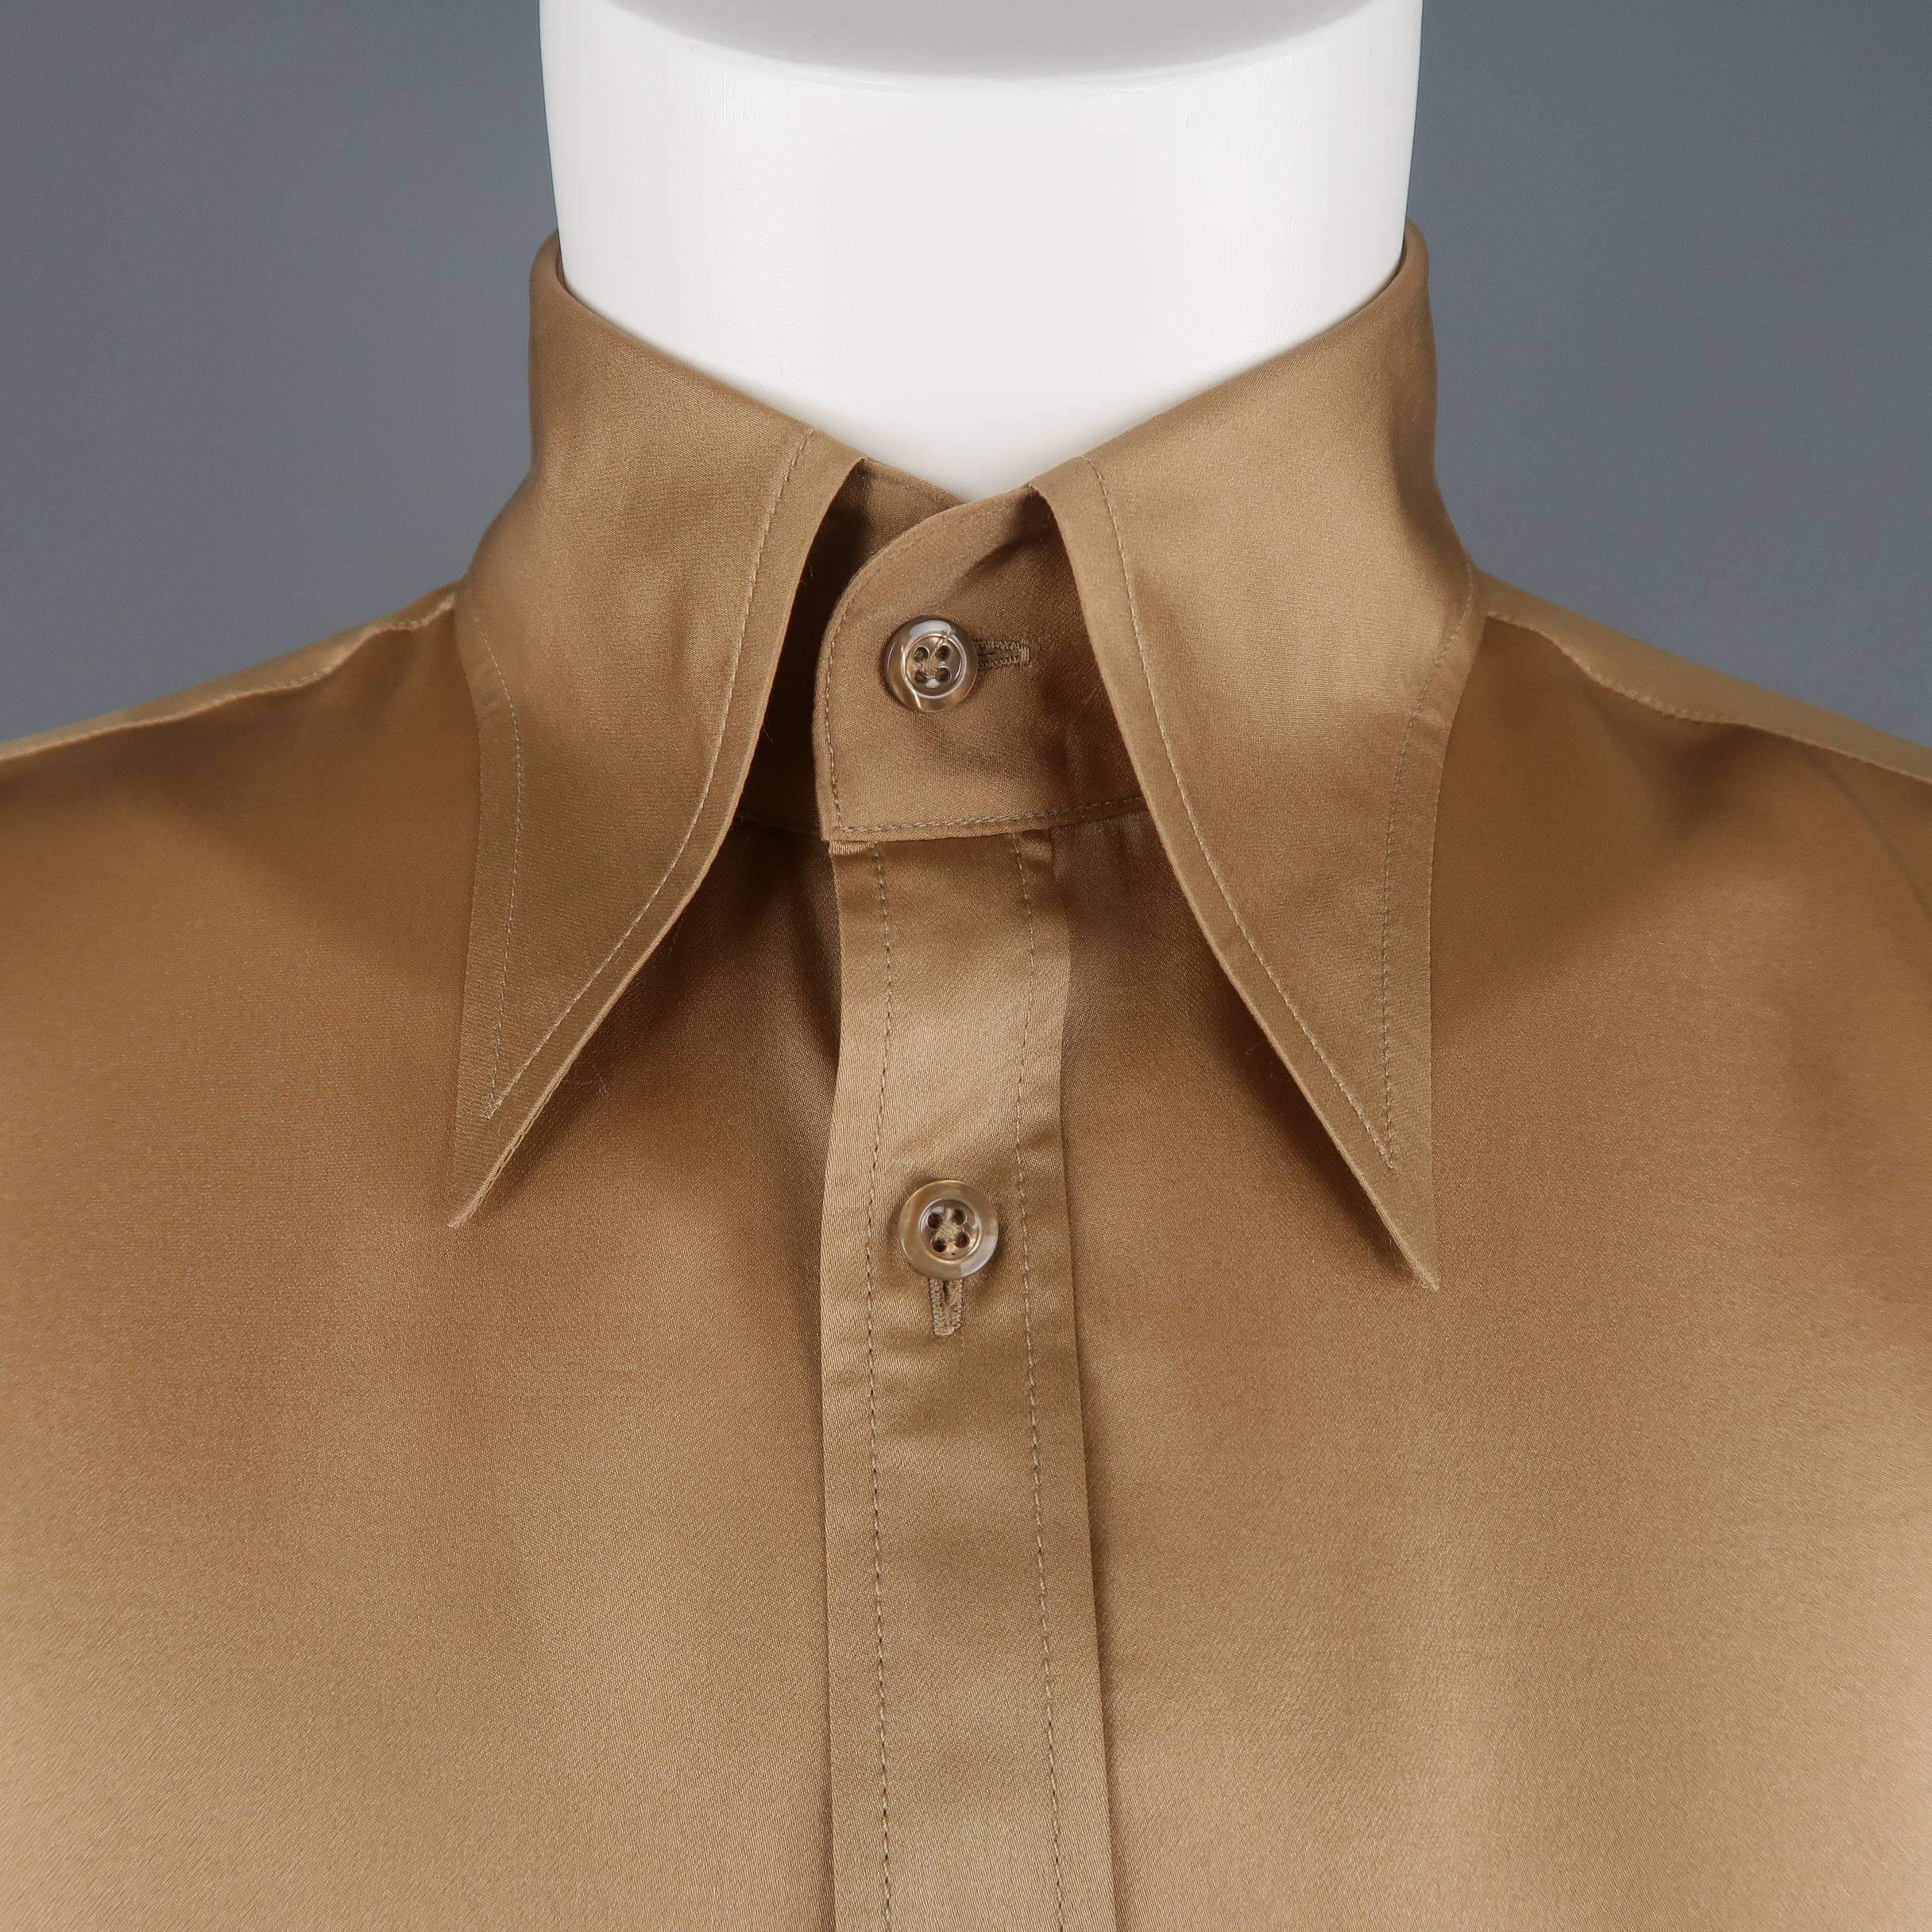 RALPH LAUREN COLLECTION blouse comes in copper beige silk satin with a curved pointed collar and fitted silhouette. Discoloration on chest. As-is. Made in USA..
 
Fair Pre-Owned Condition.
Marked: 8
 
Measurements:
 
Shoulder: 15 in.
Bust: 38